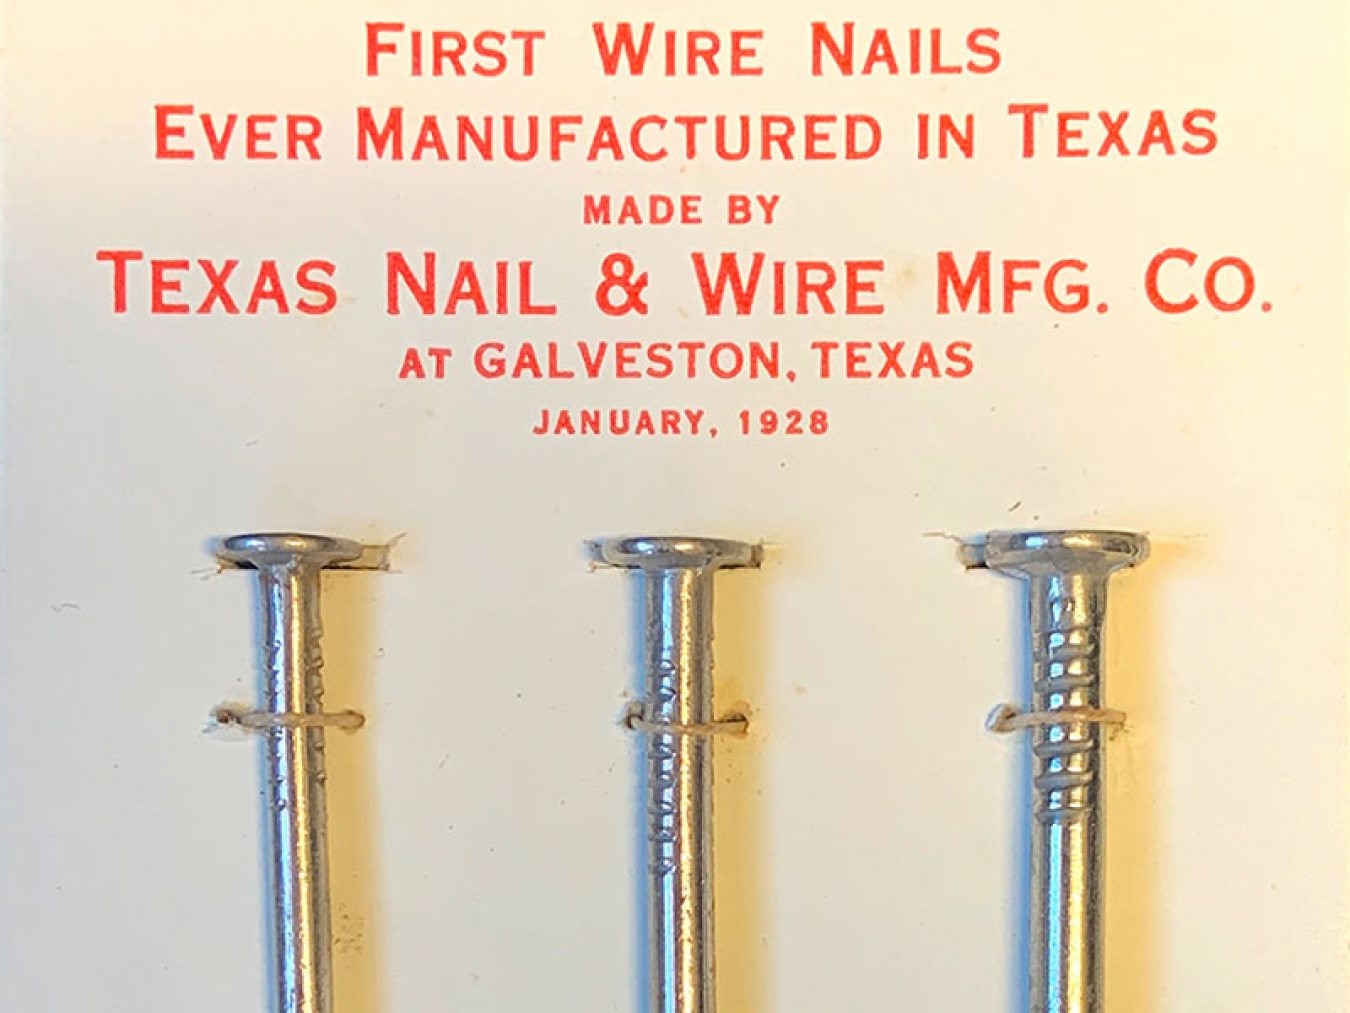 First Wire Nails Manufactured in Texas